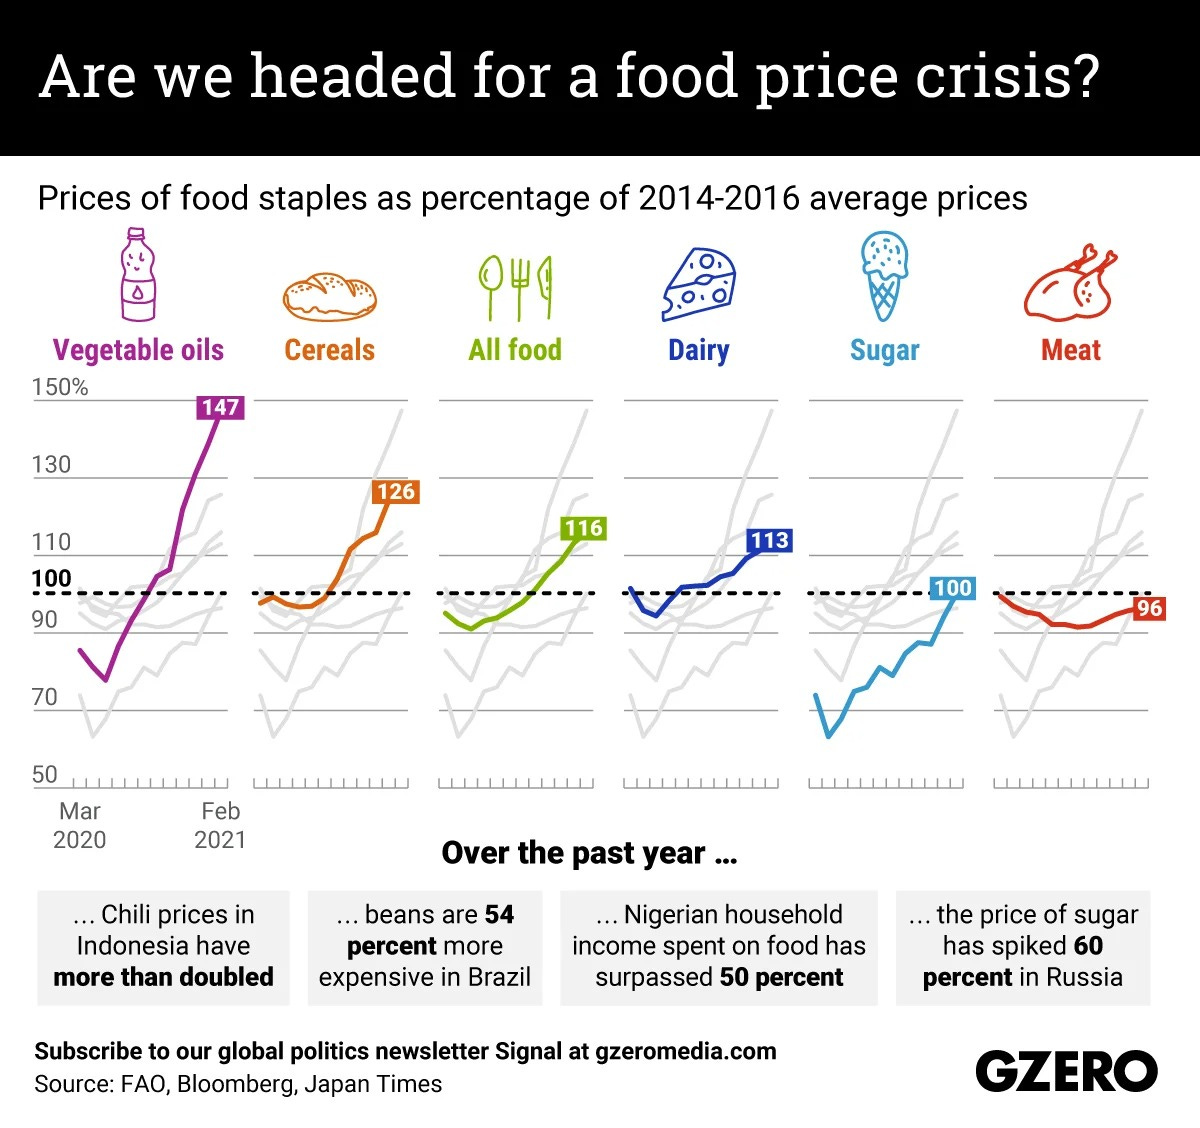 The Graphic Truth: Are we headed for a food price crisis?